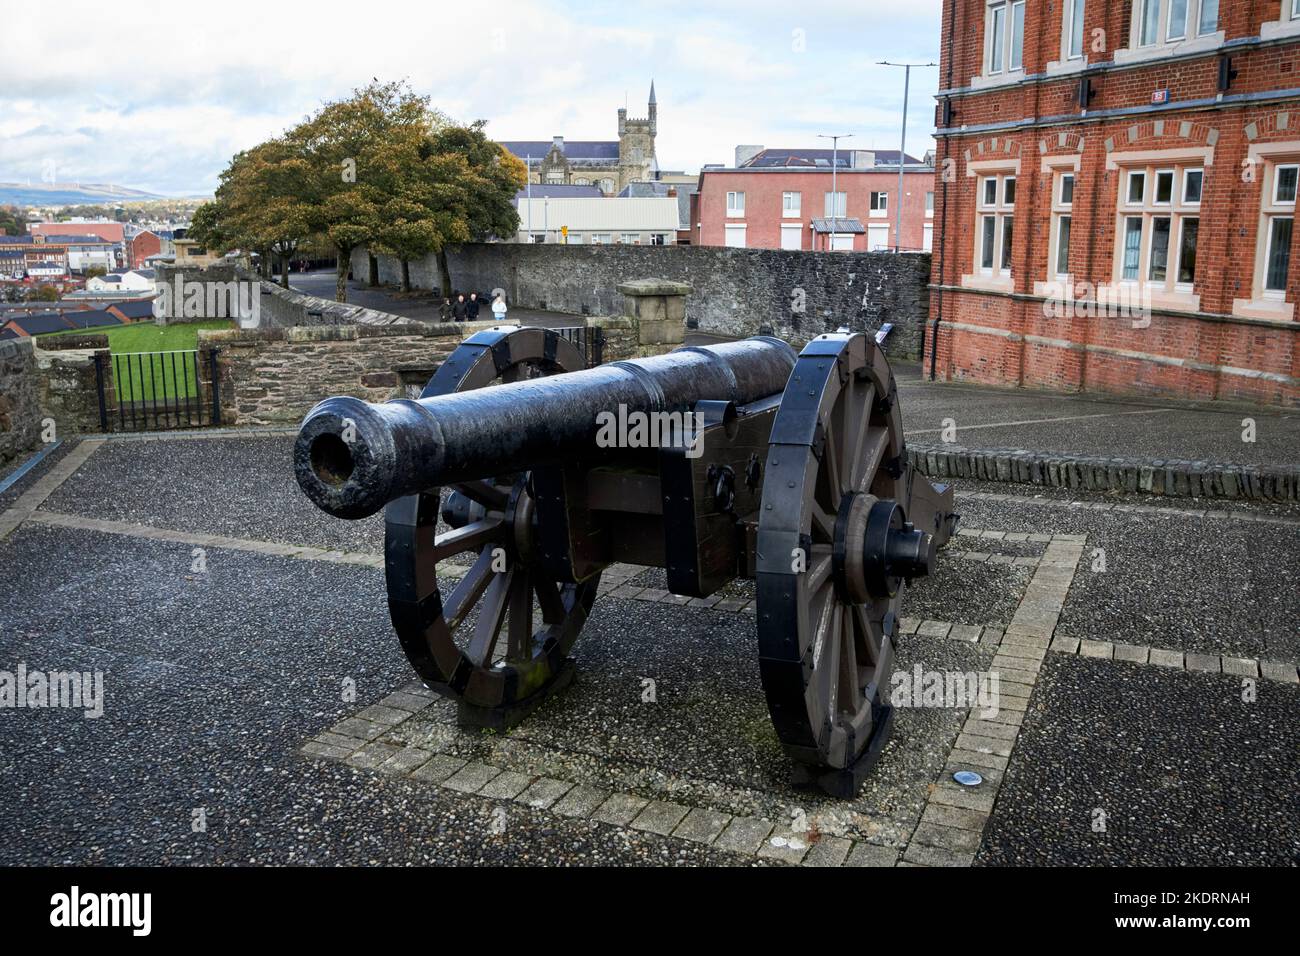 cannon on the double bastion on the walls of derry londonderry northern ireland uk Stock Photo